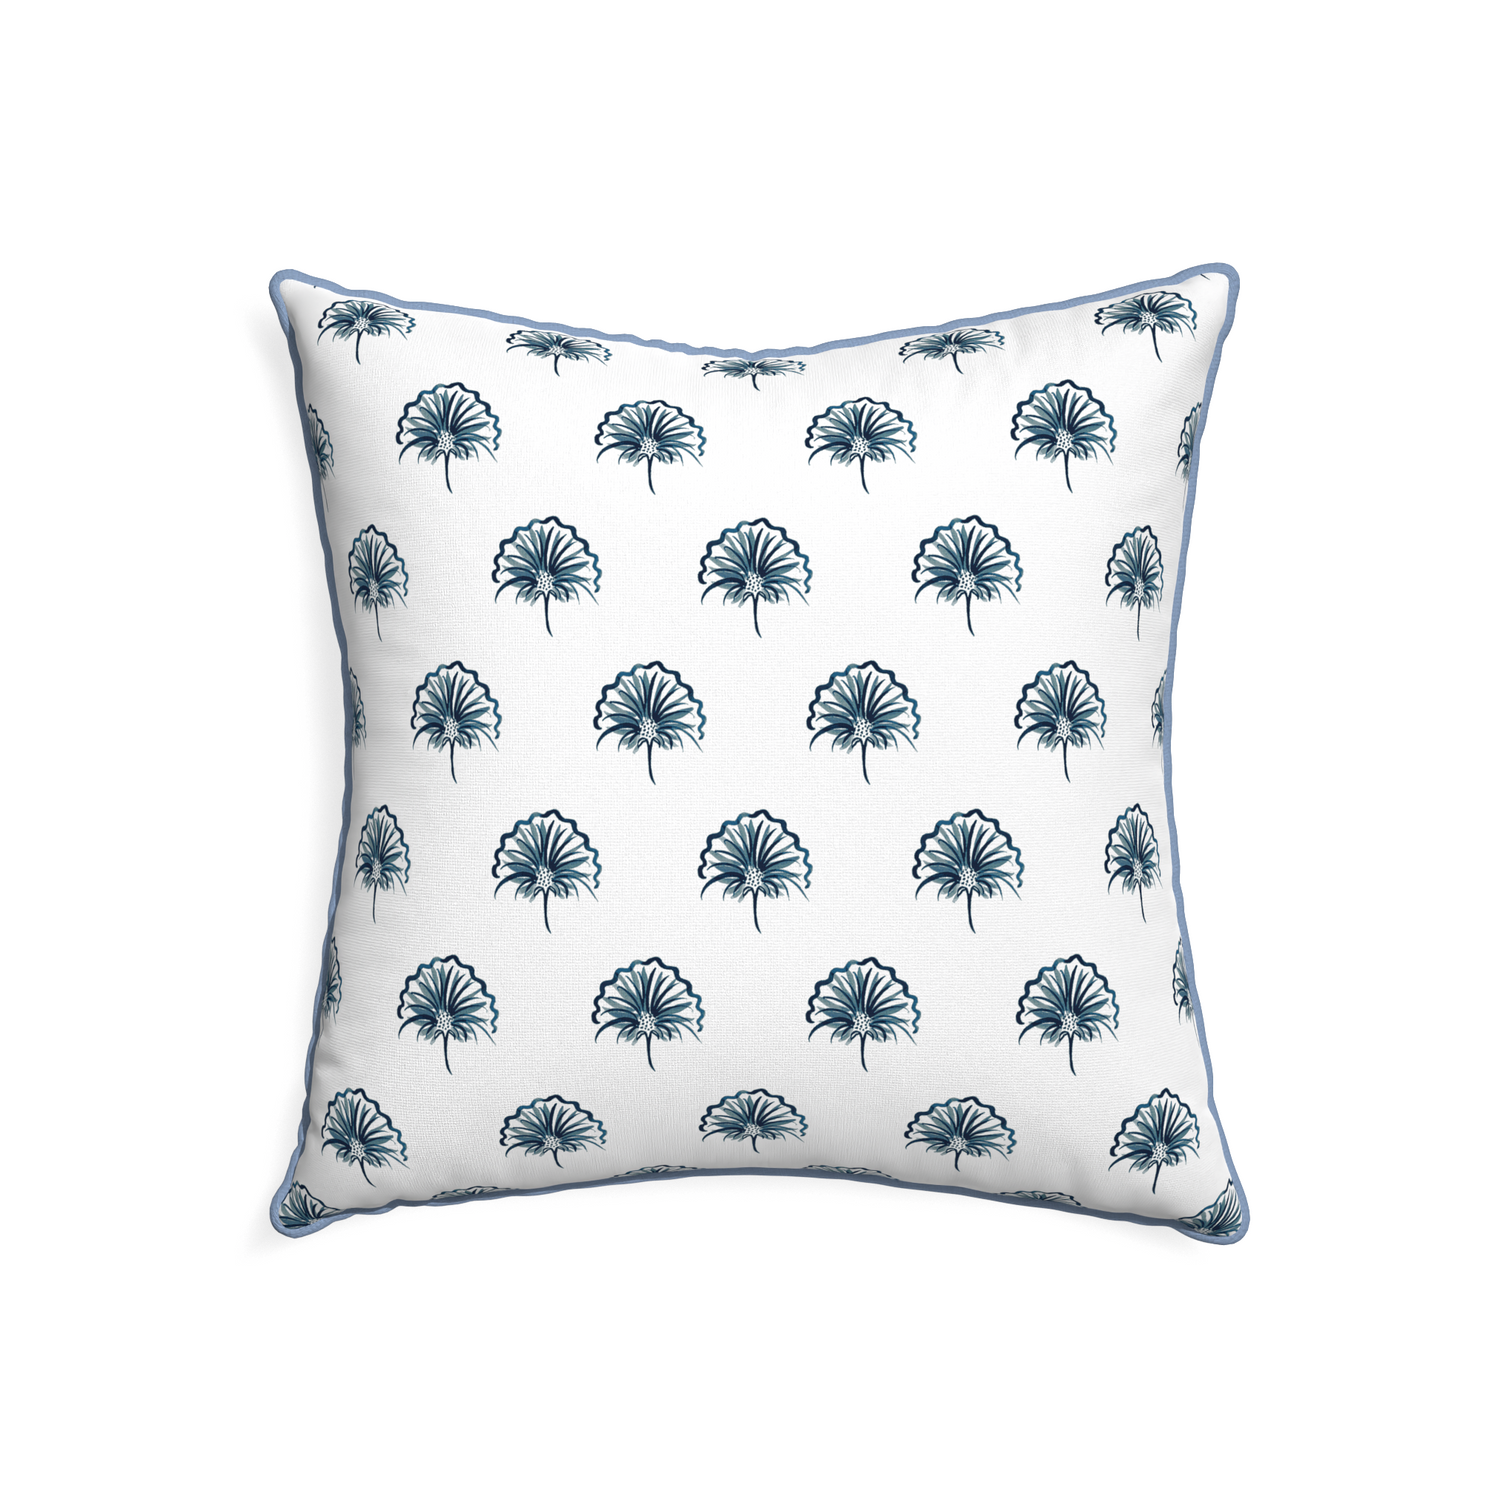 22-square penelope midnight custom floral navypillow with sky piping on white background